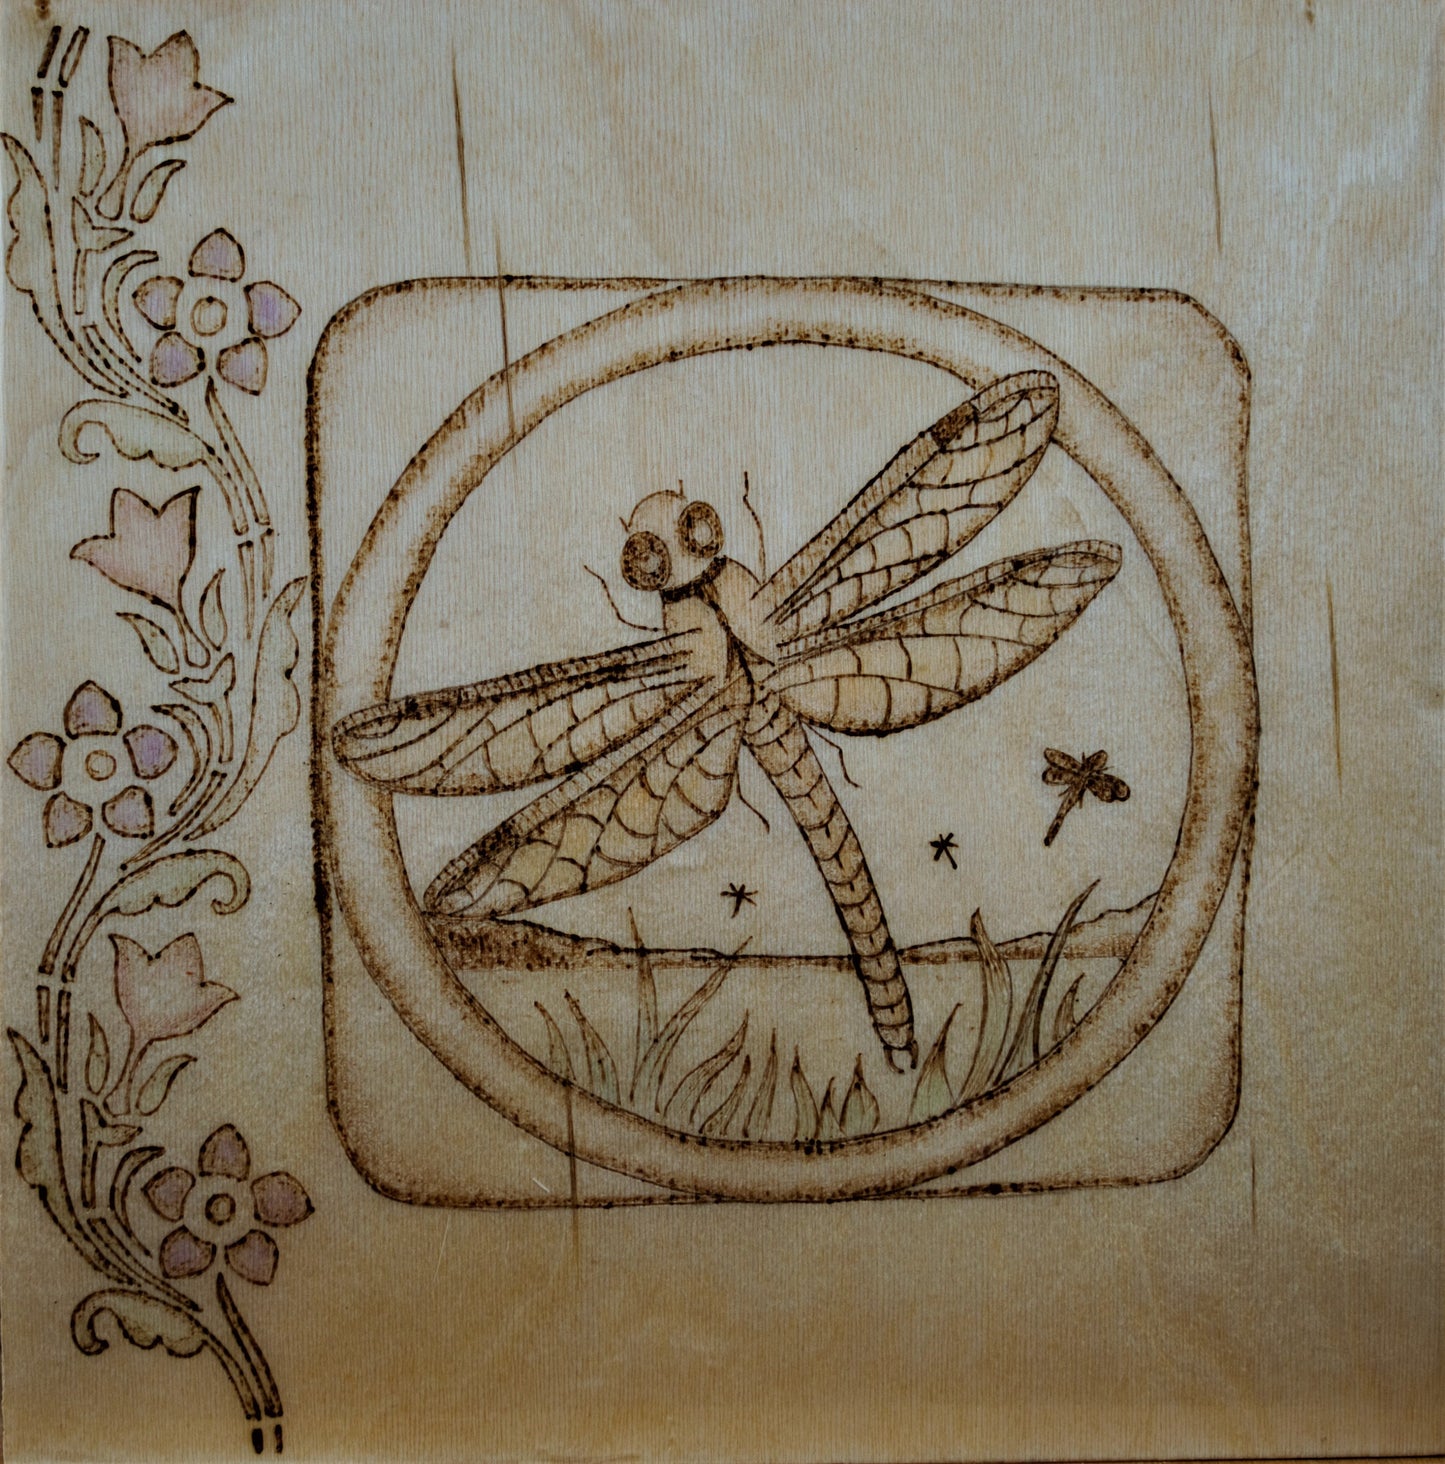 Floral Dragonfly Design - Hand-crafted Woodburning (Pyrography) on Birch or Basswood